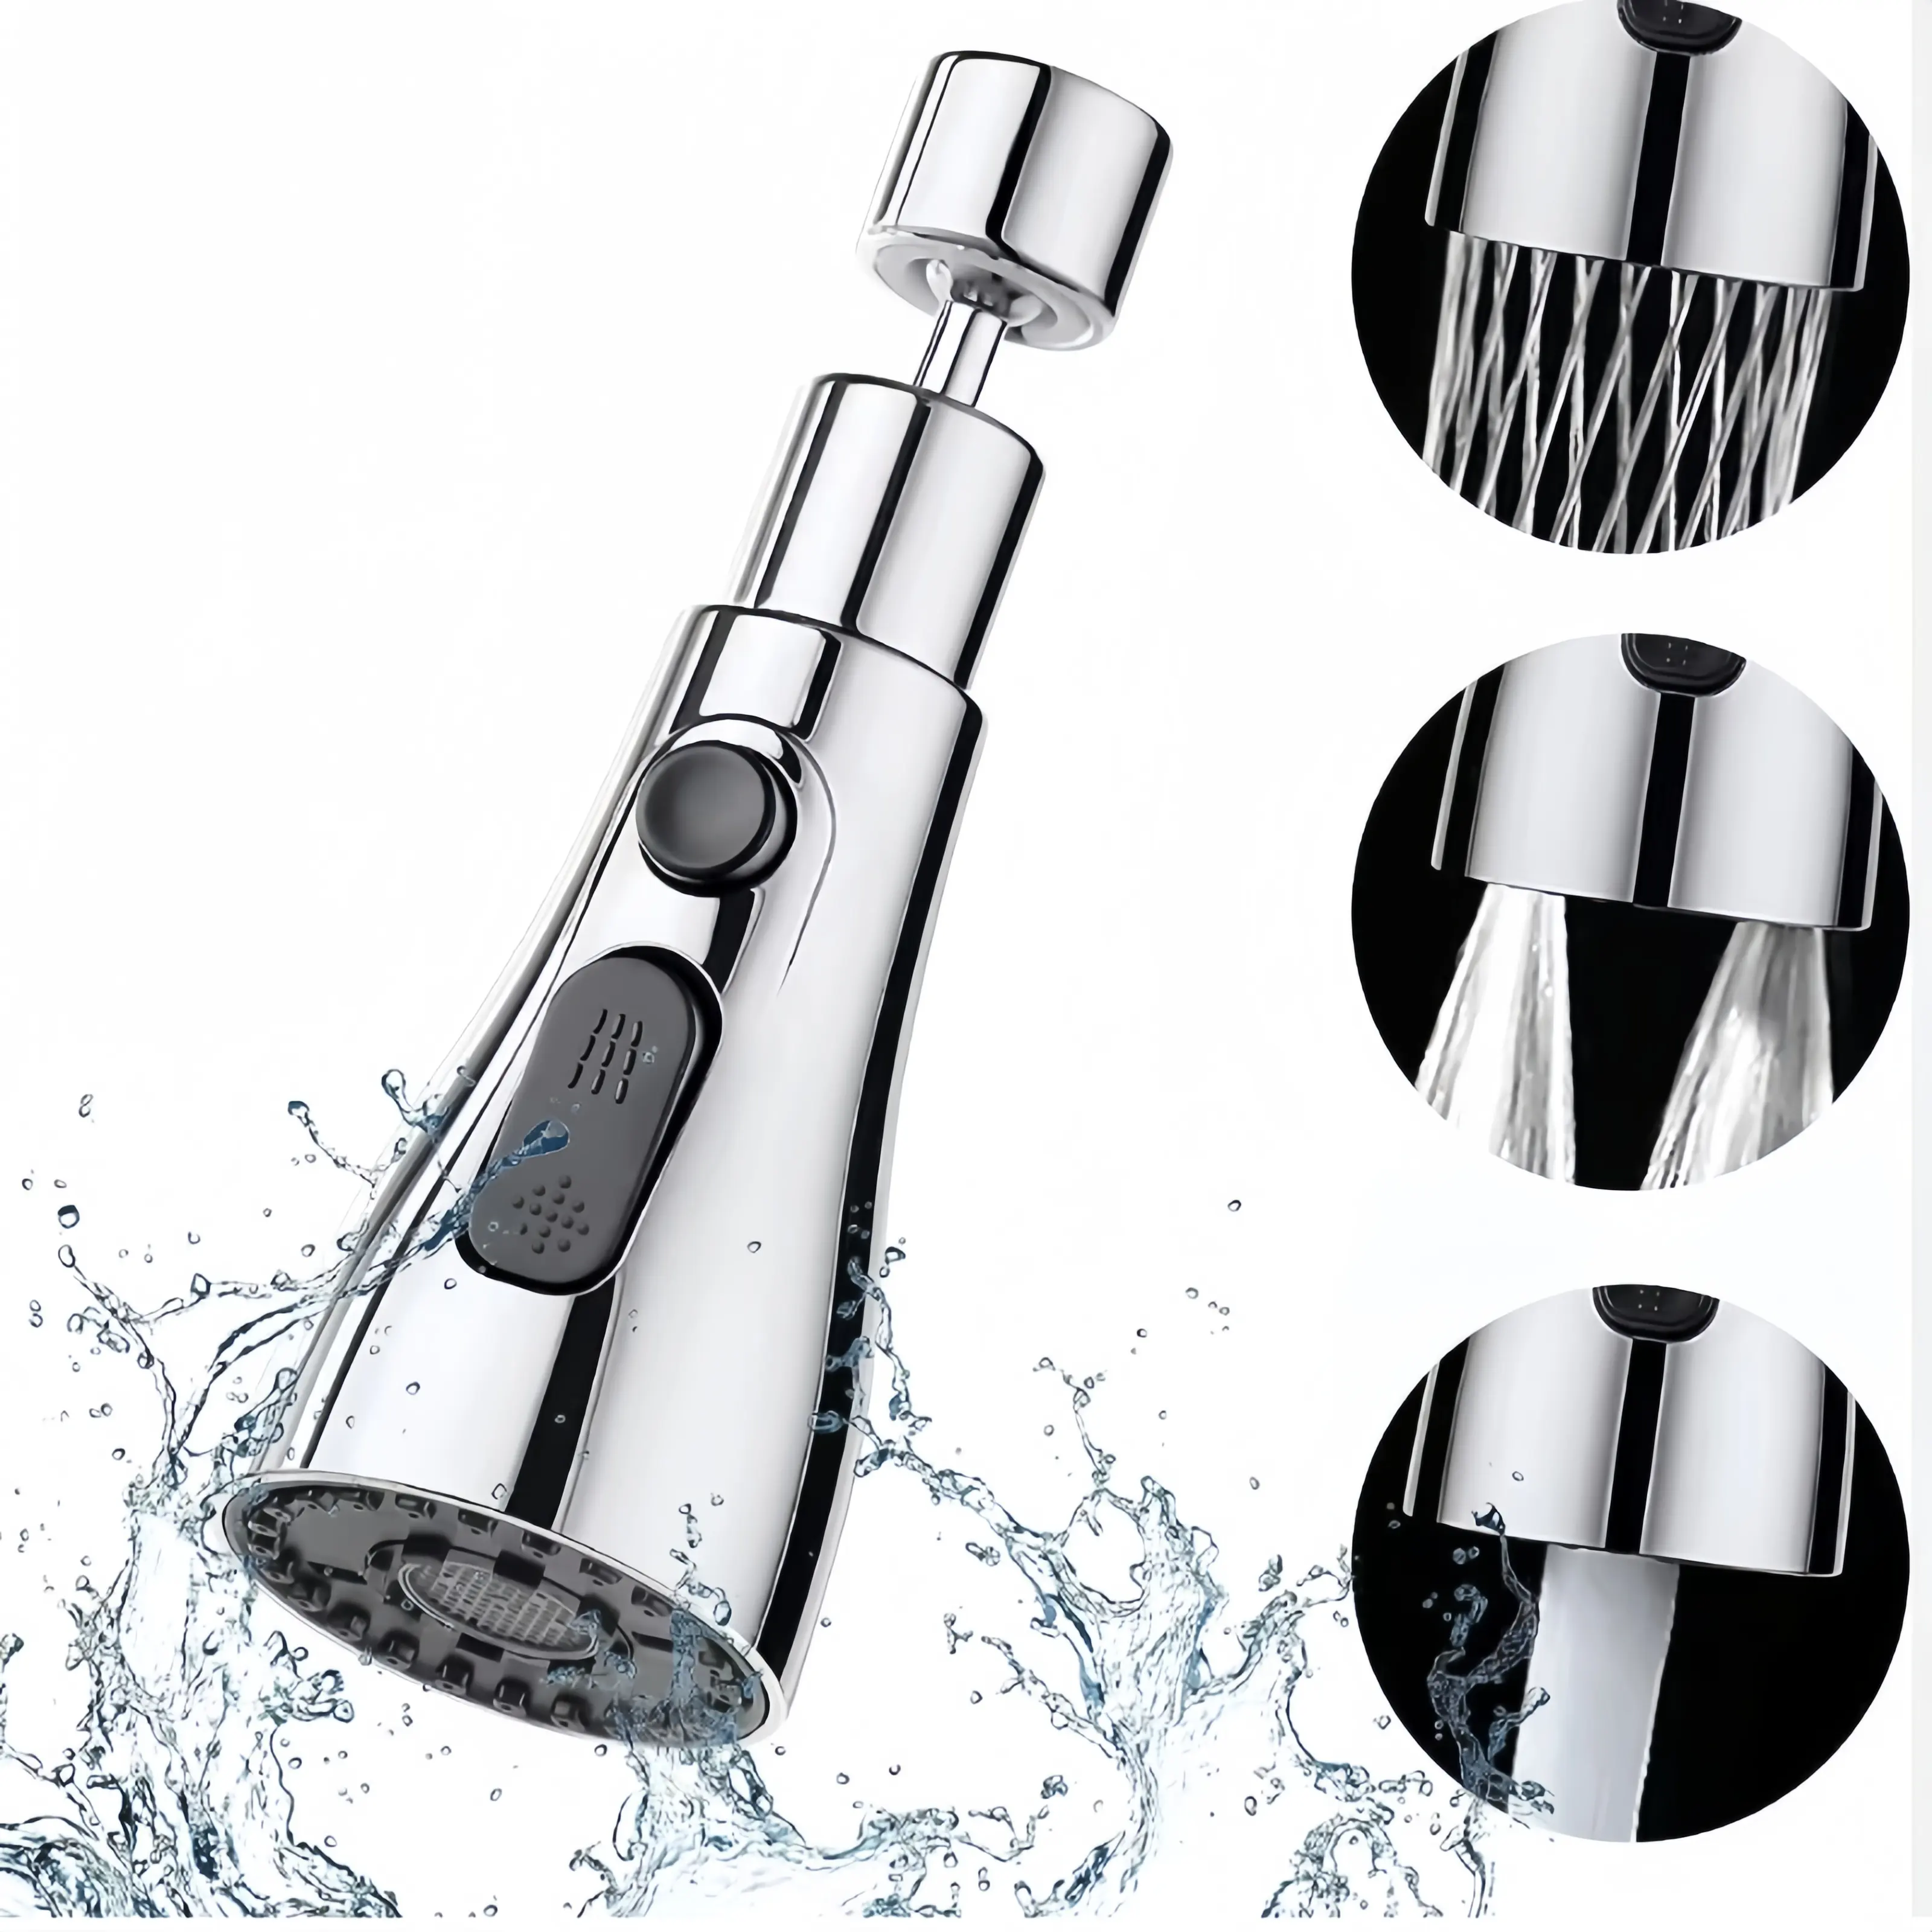 Kitchen Tap Spray Head 360 Degree Swivel Spout, Sink Tap Spray Attachment Head with 3 Function Spray Modes, Kitchen Faucet Head